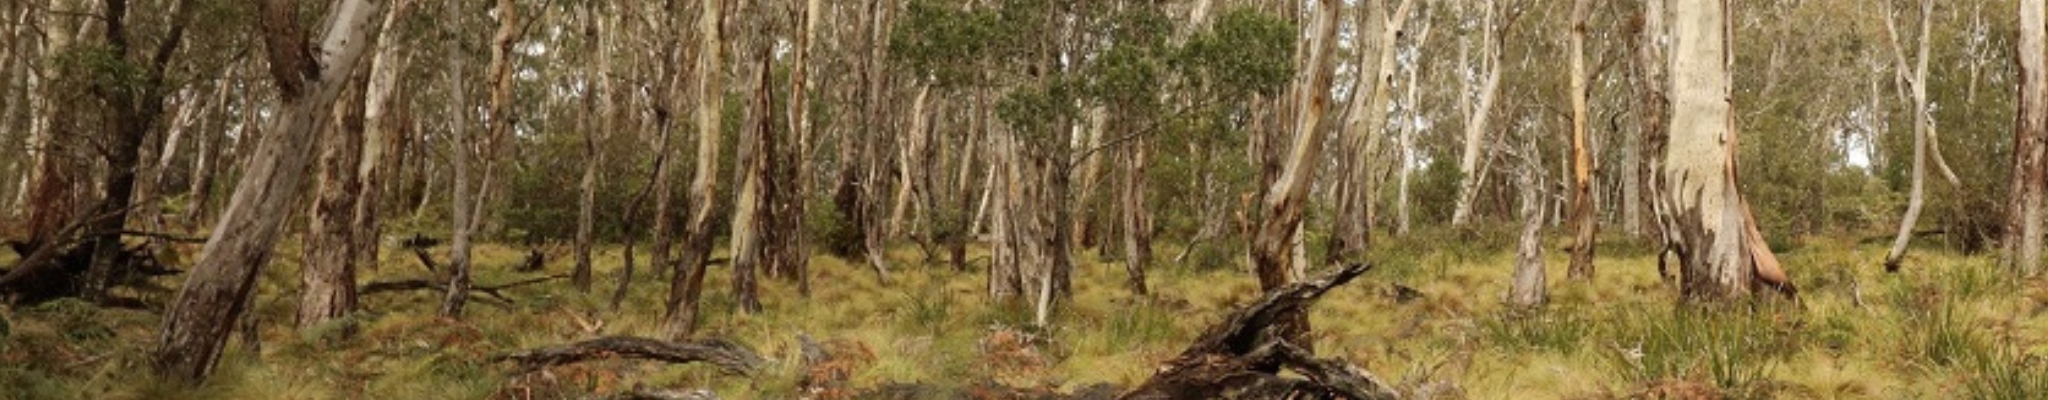 A landscape image of the base of trees in a wooded environment